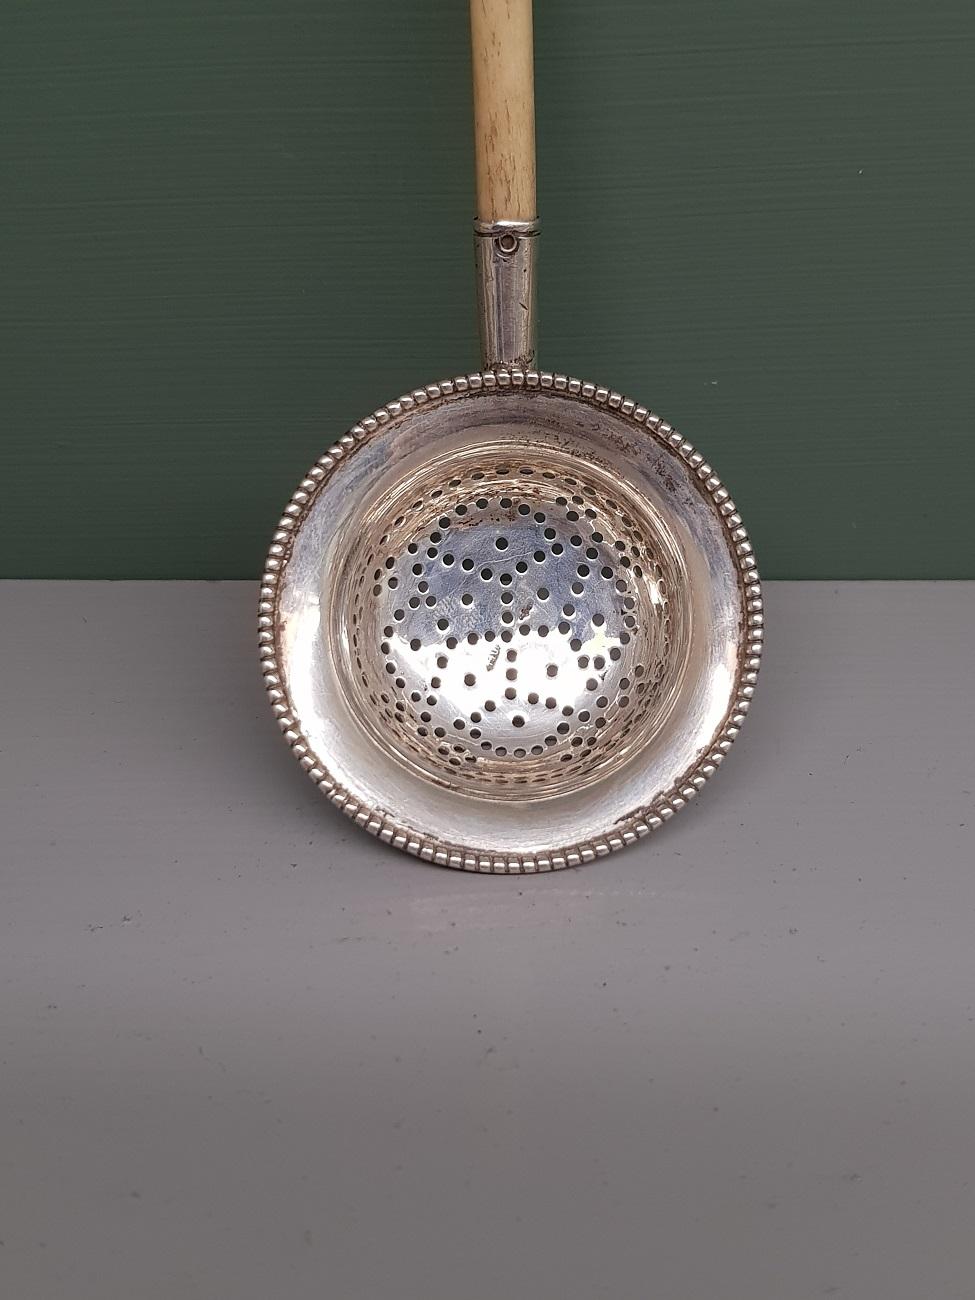 Mid 20th Century Dutch silver tea strainer with bone handle and is marked with a sword and unclear maker's mark, early 20th century. 

The measurements are,
Depth 3 cm/ 1.1 inch.
Width 5.2 cm/ 2 inch.
Height 13.5 cm/ 5.3 inch.